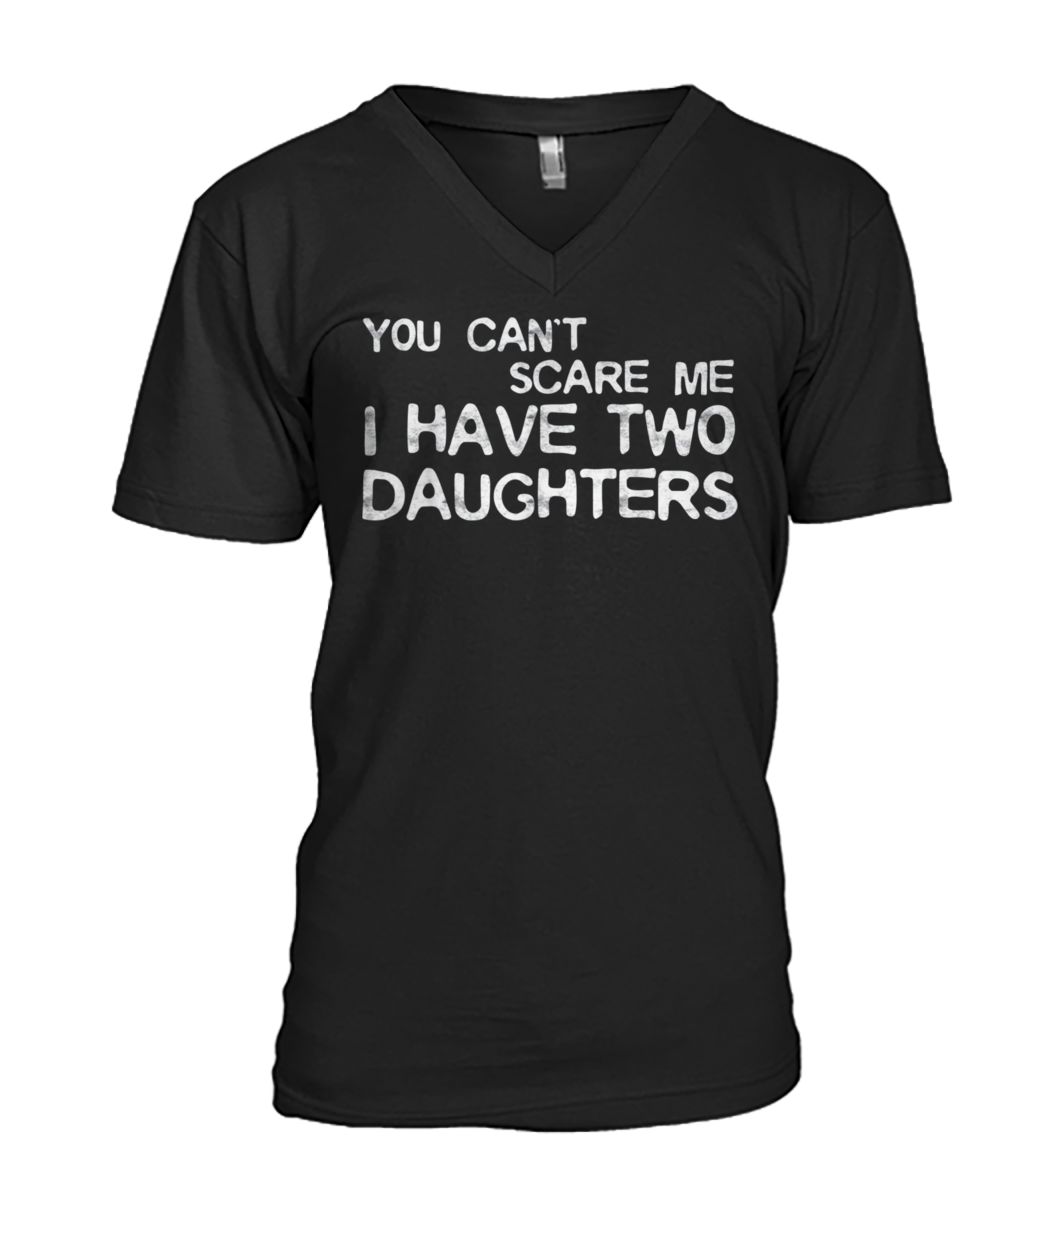 You can't scare me I have two daughters mens v-neck